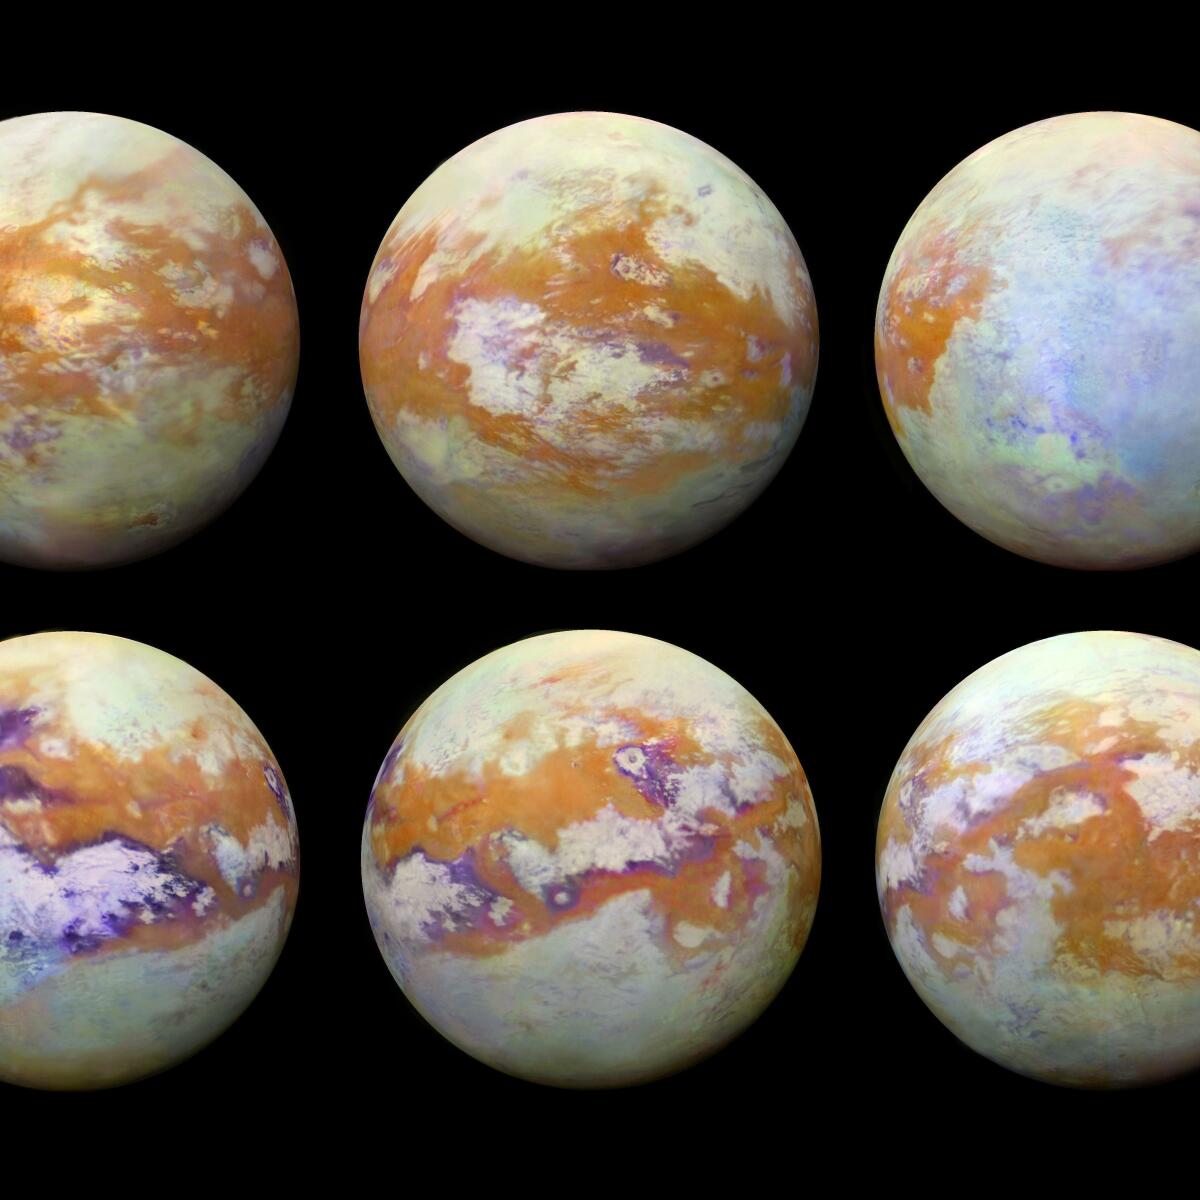 infrared image of Saturn's moon Titan are the clearest we've seen